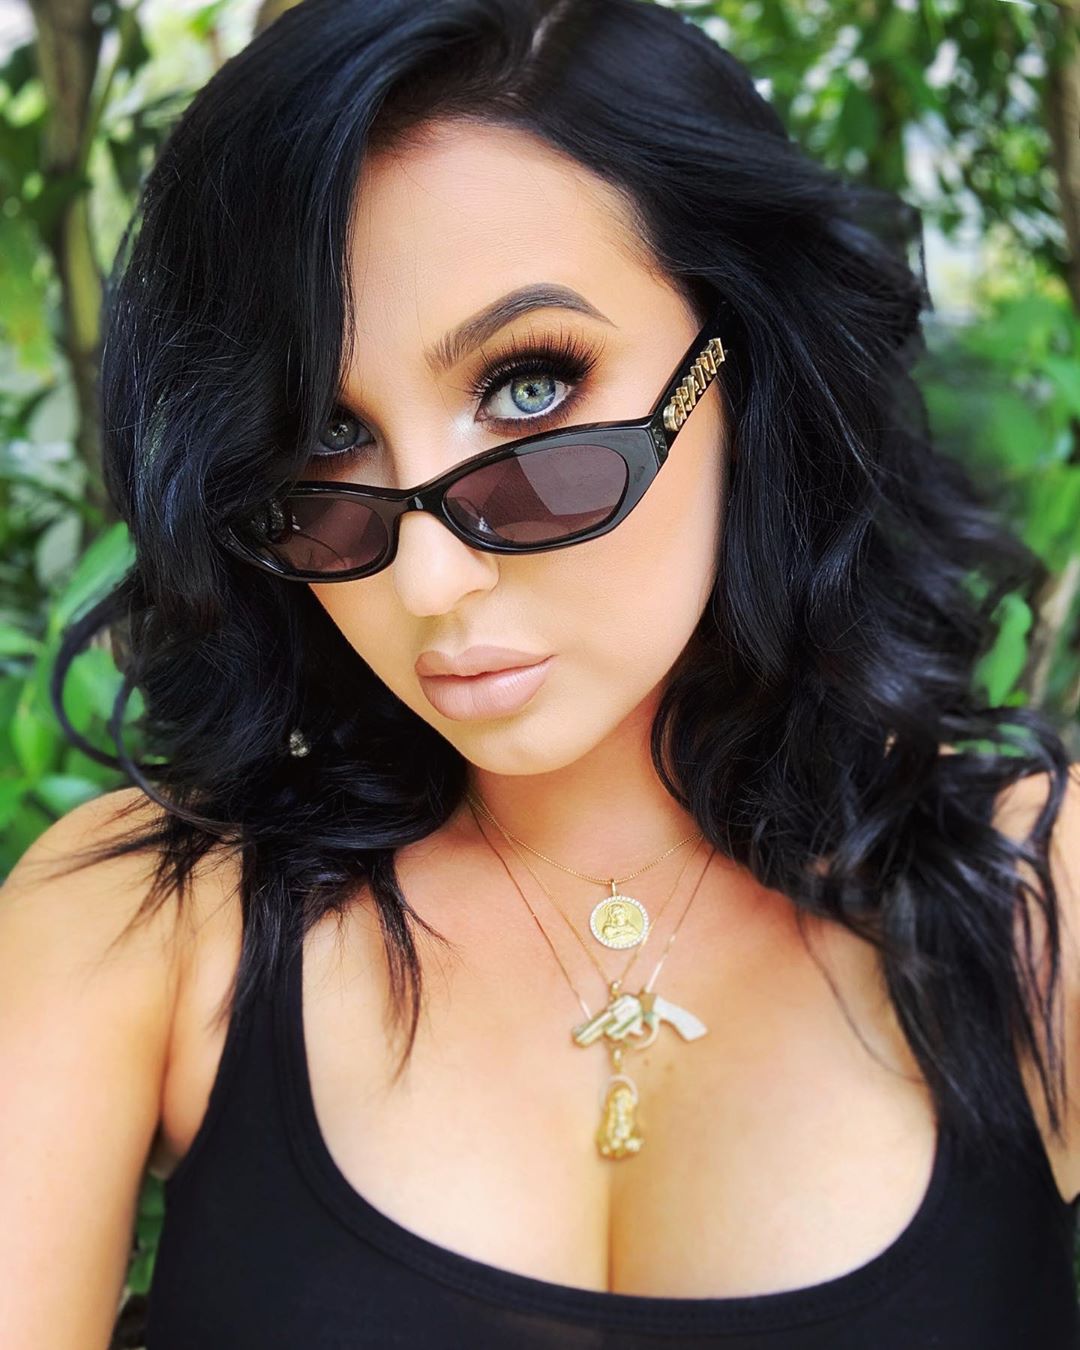 Jaclyn Hill's Transformation: See r Before and After Fame